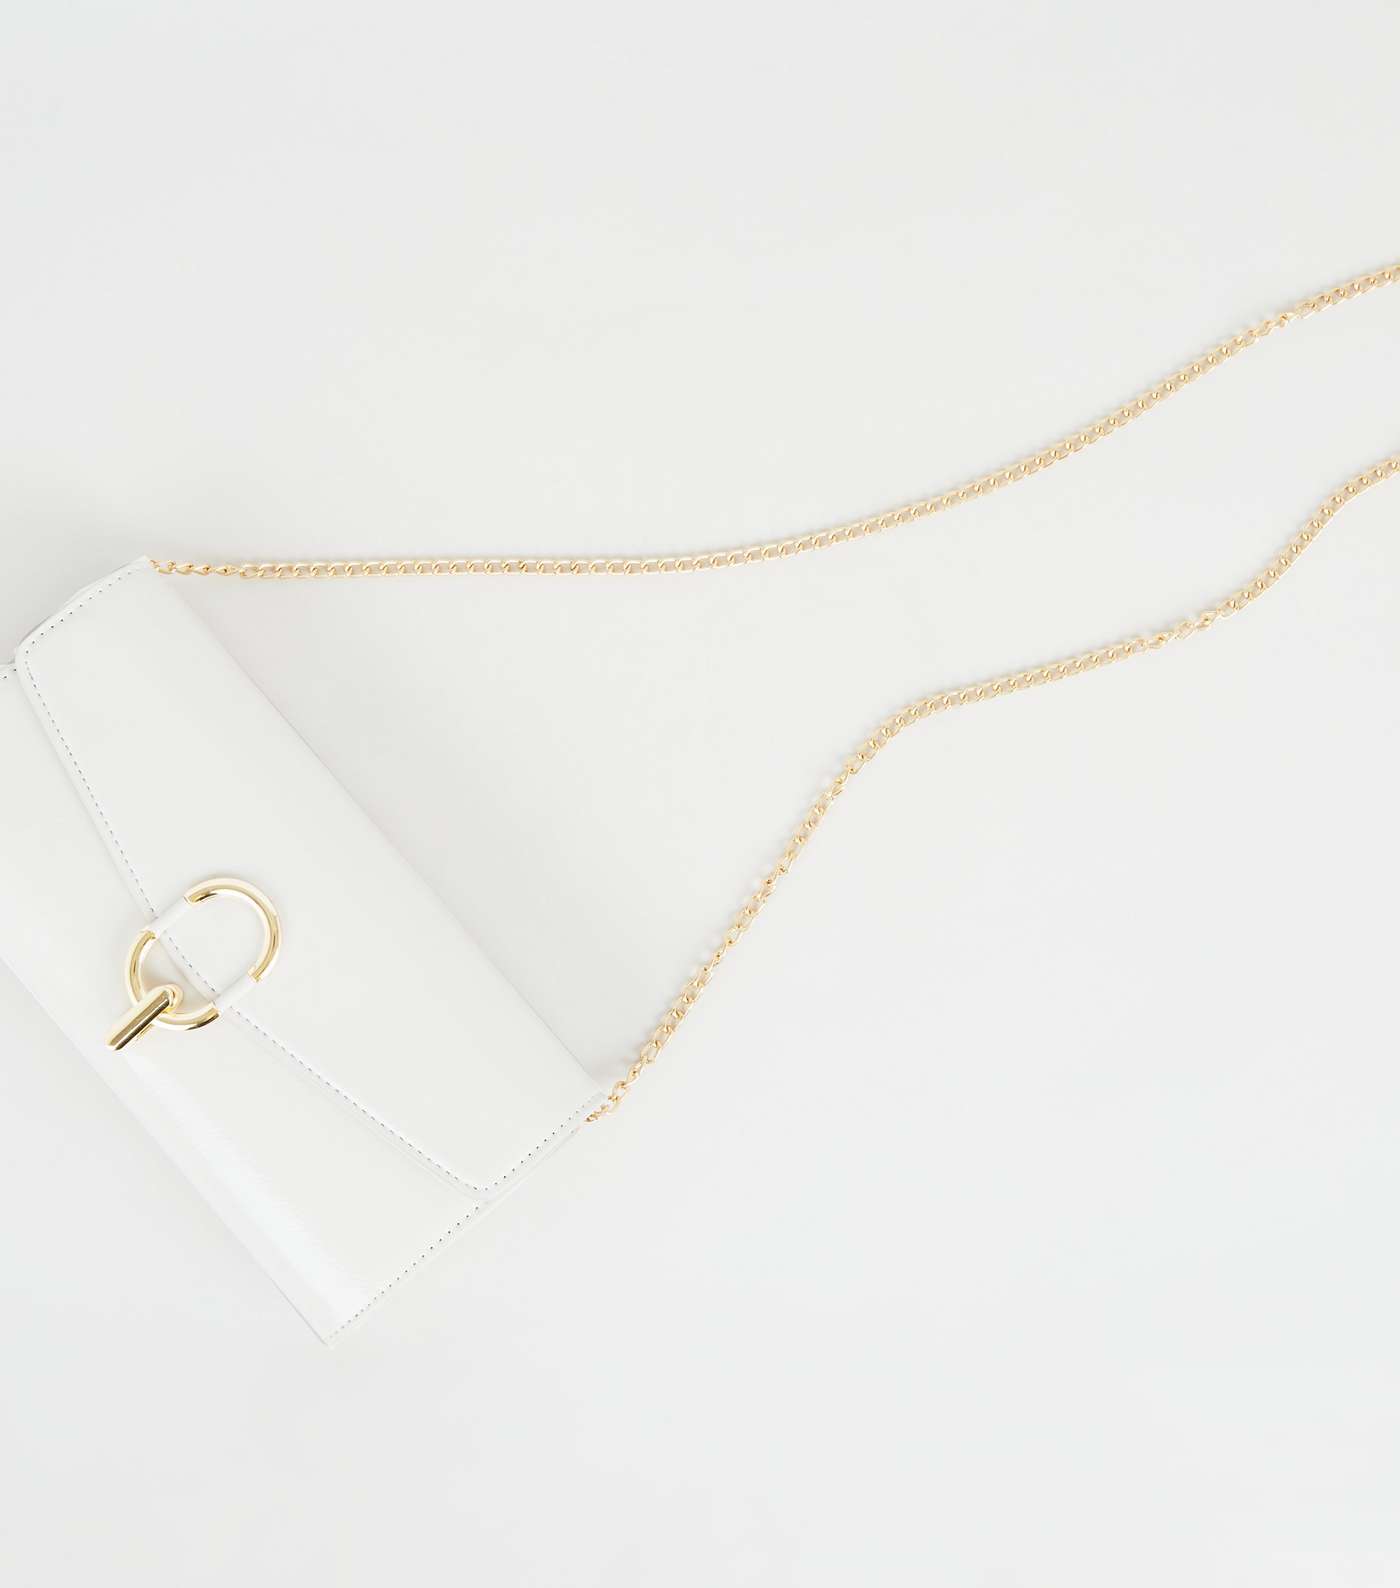 Off White Leather-Look Ring Clutch Bag Image 3